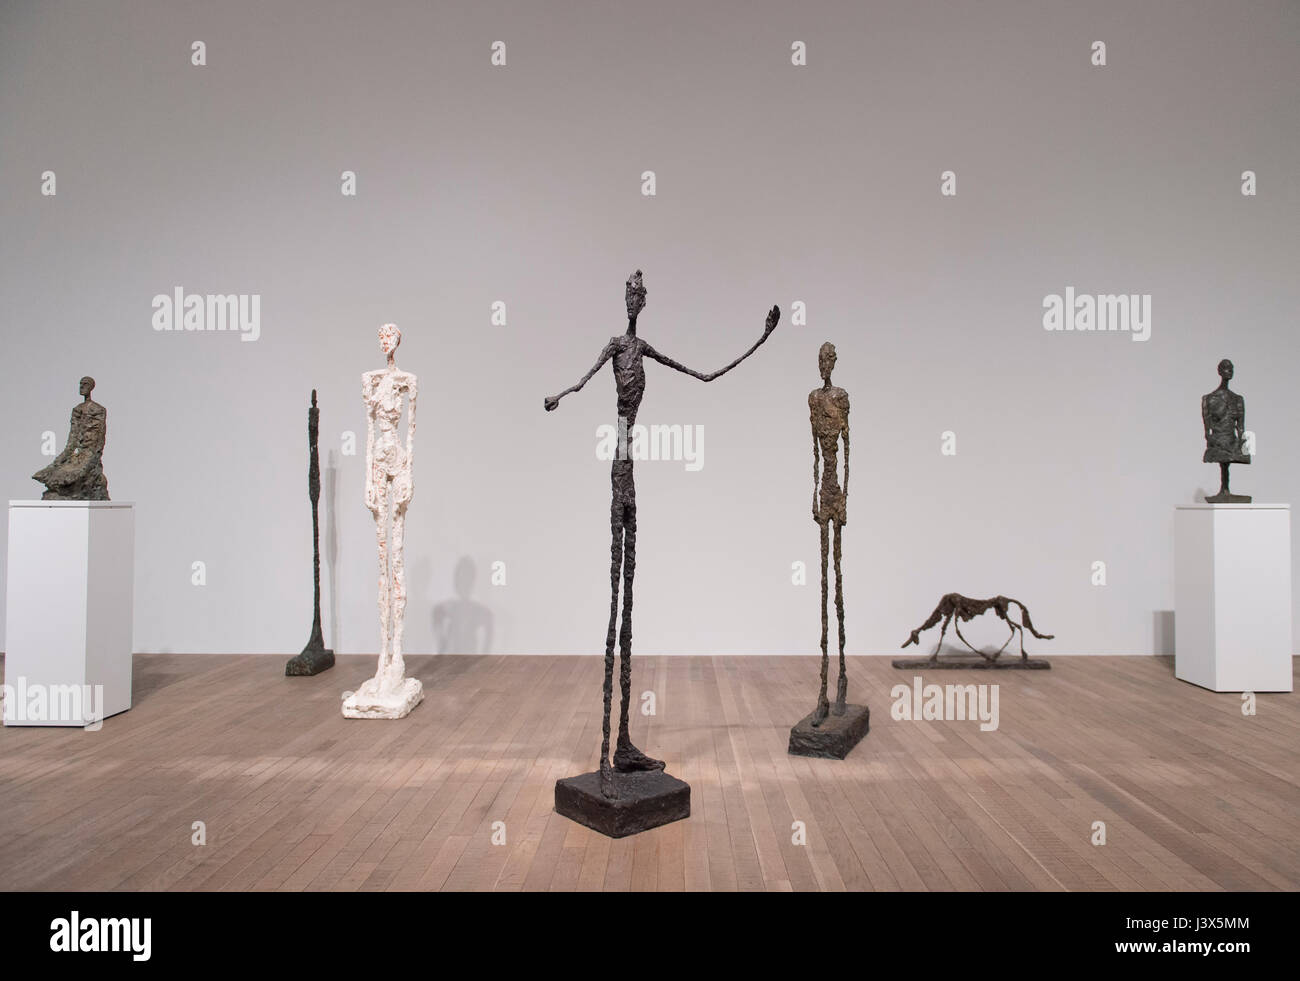 Tate Modern, London, UK. 8th May, 2017. The UK’s first major retrospective of Swiss artist Alberto Giacometti (1901-1966) for 20 years. Celebrated as a sculptor, painter and draughtsman, Giacometti’s distinctive elongated figures are some of the most instantly recognisable works of modern art. This exhibition reasserts Giacometti’s place alongside the likes of Matisse, Picasso and Degas as one of the great painter-sculptors of the 20th century. Credit: Malcolm Park editorial/Alamy Live News. Stock Photo